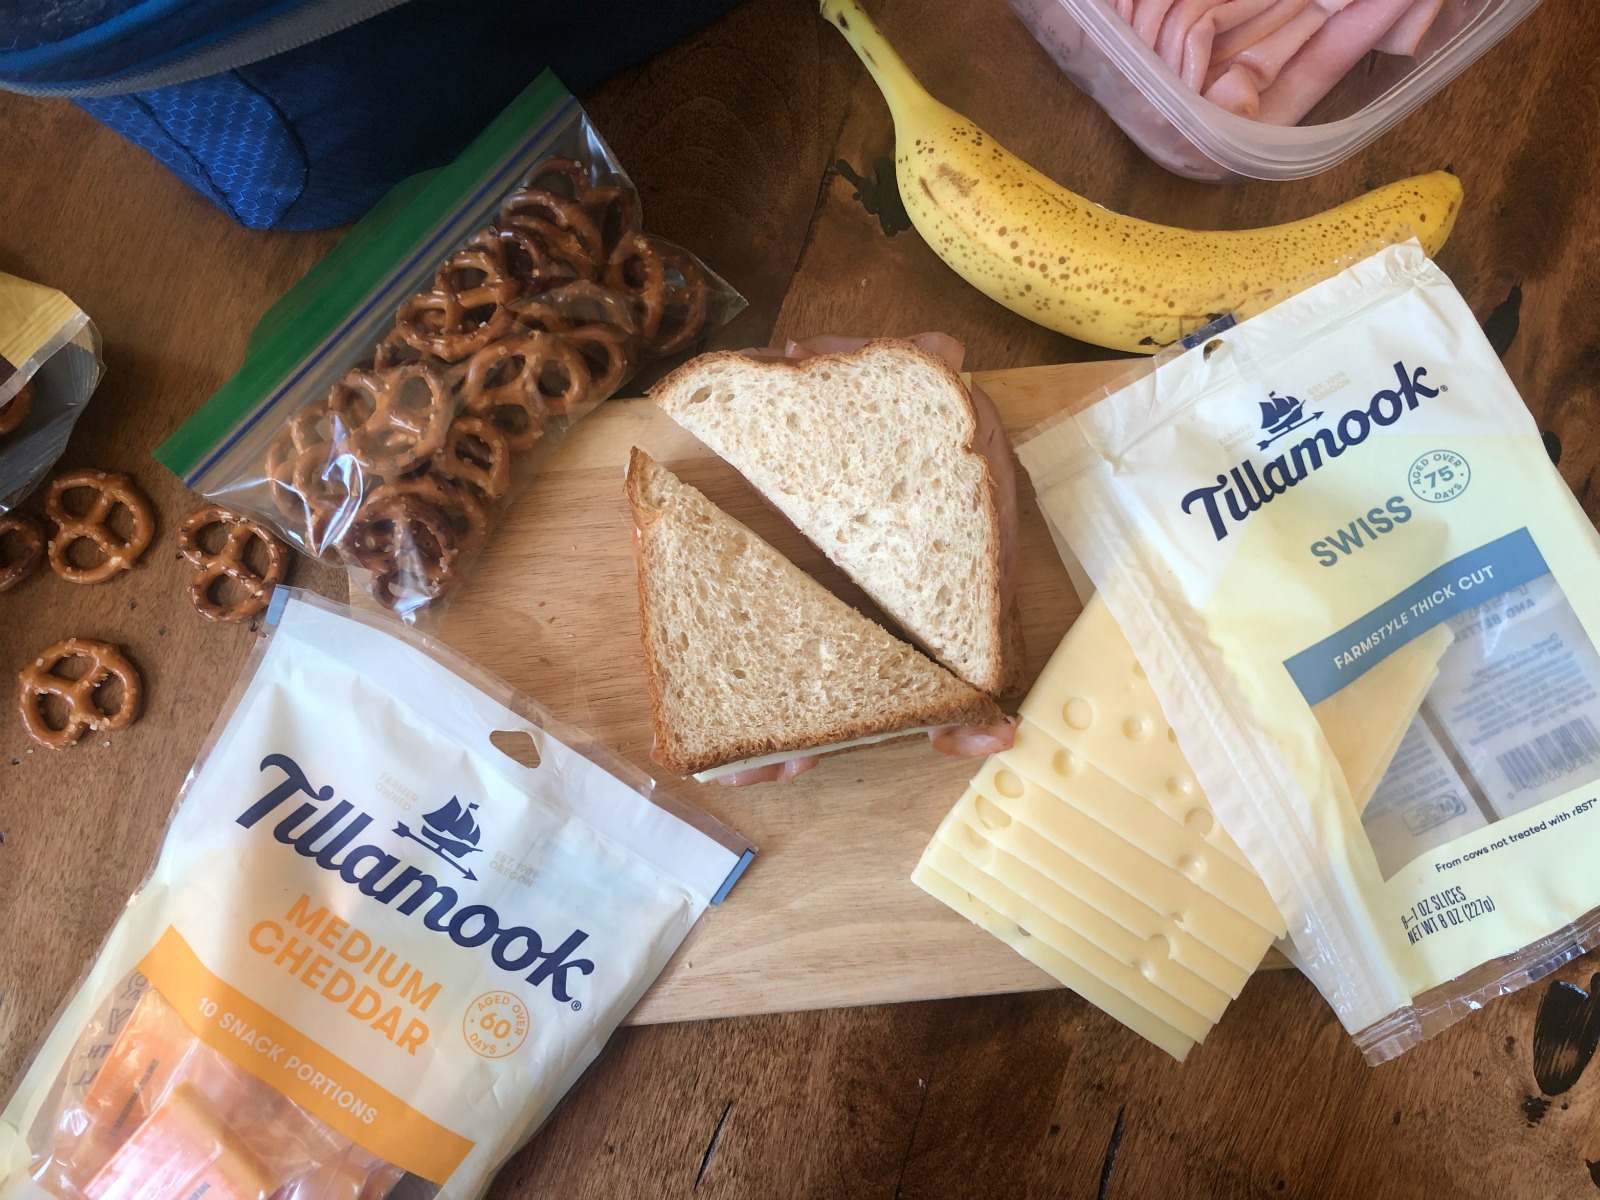 Salami & Cheese Skewers - Easy & Delicious Lunch Option For Back To School (Save On Tillamook Cheese At Publix) on I Heart Publix